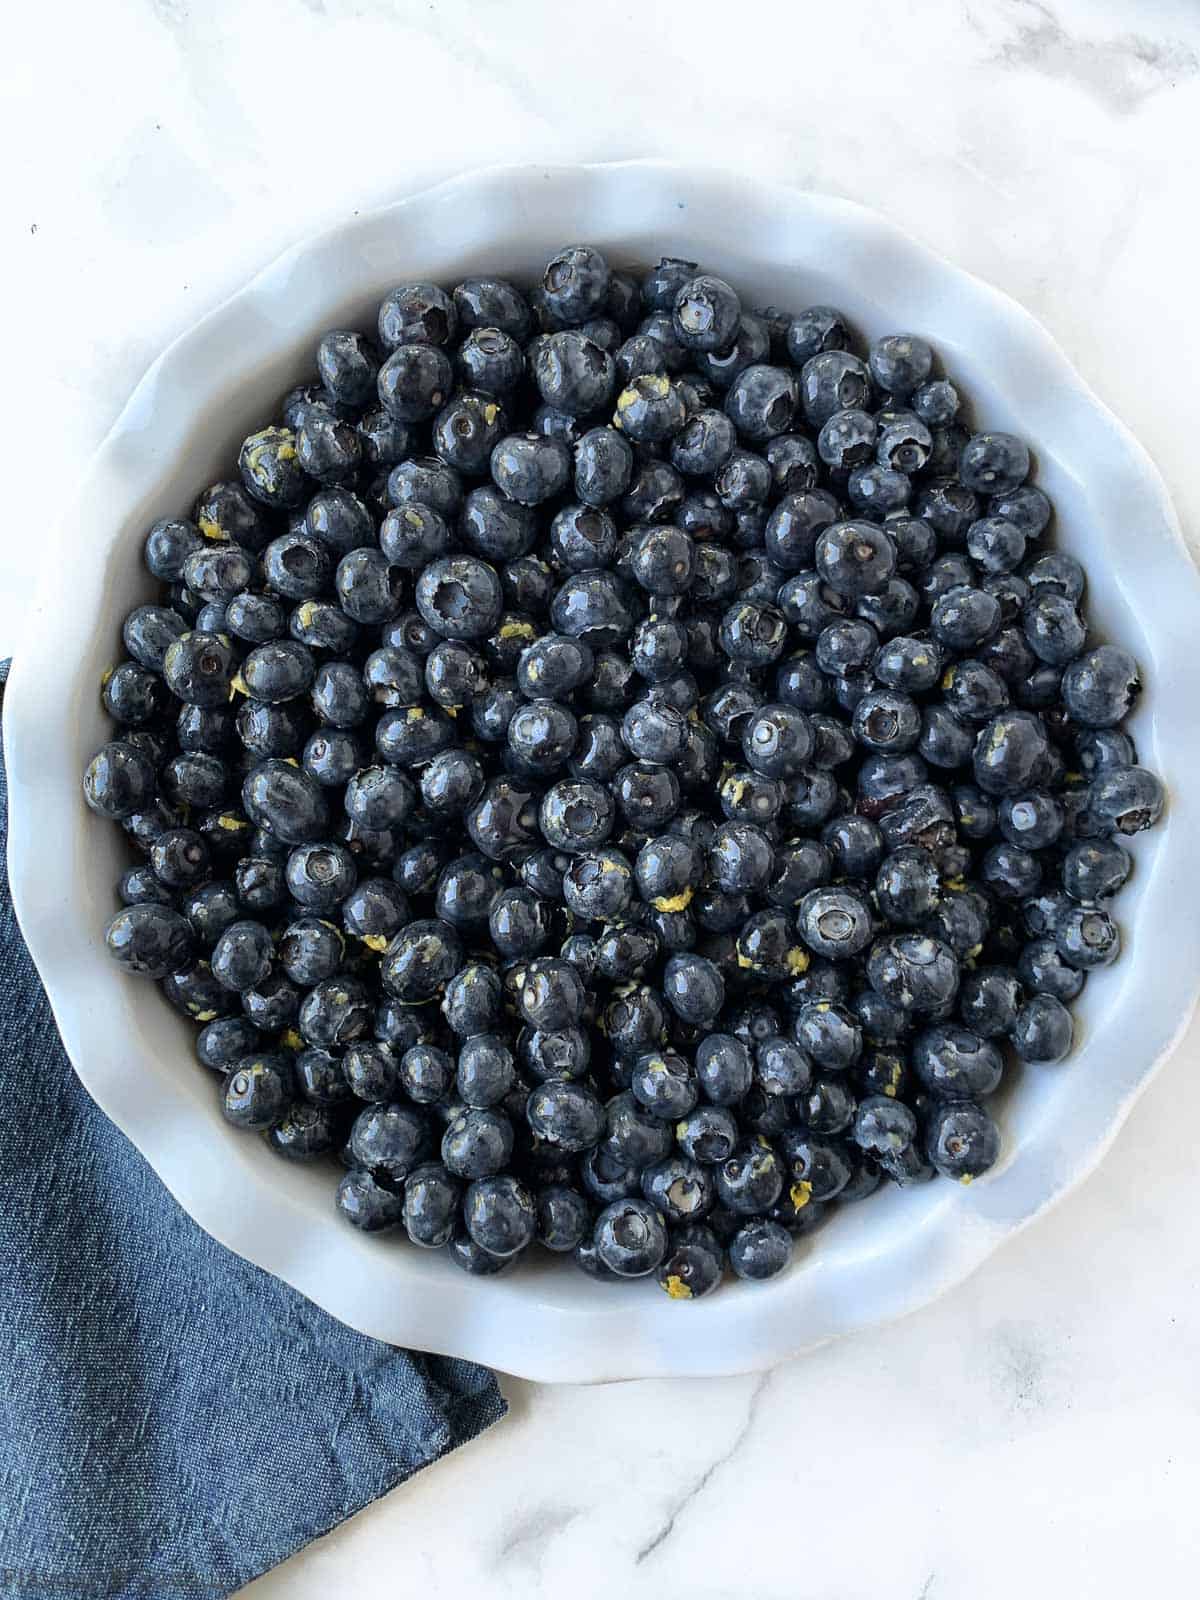 Blueberries in a baking dish.